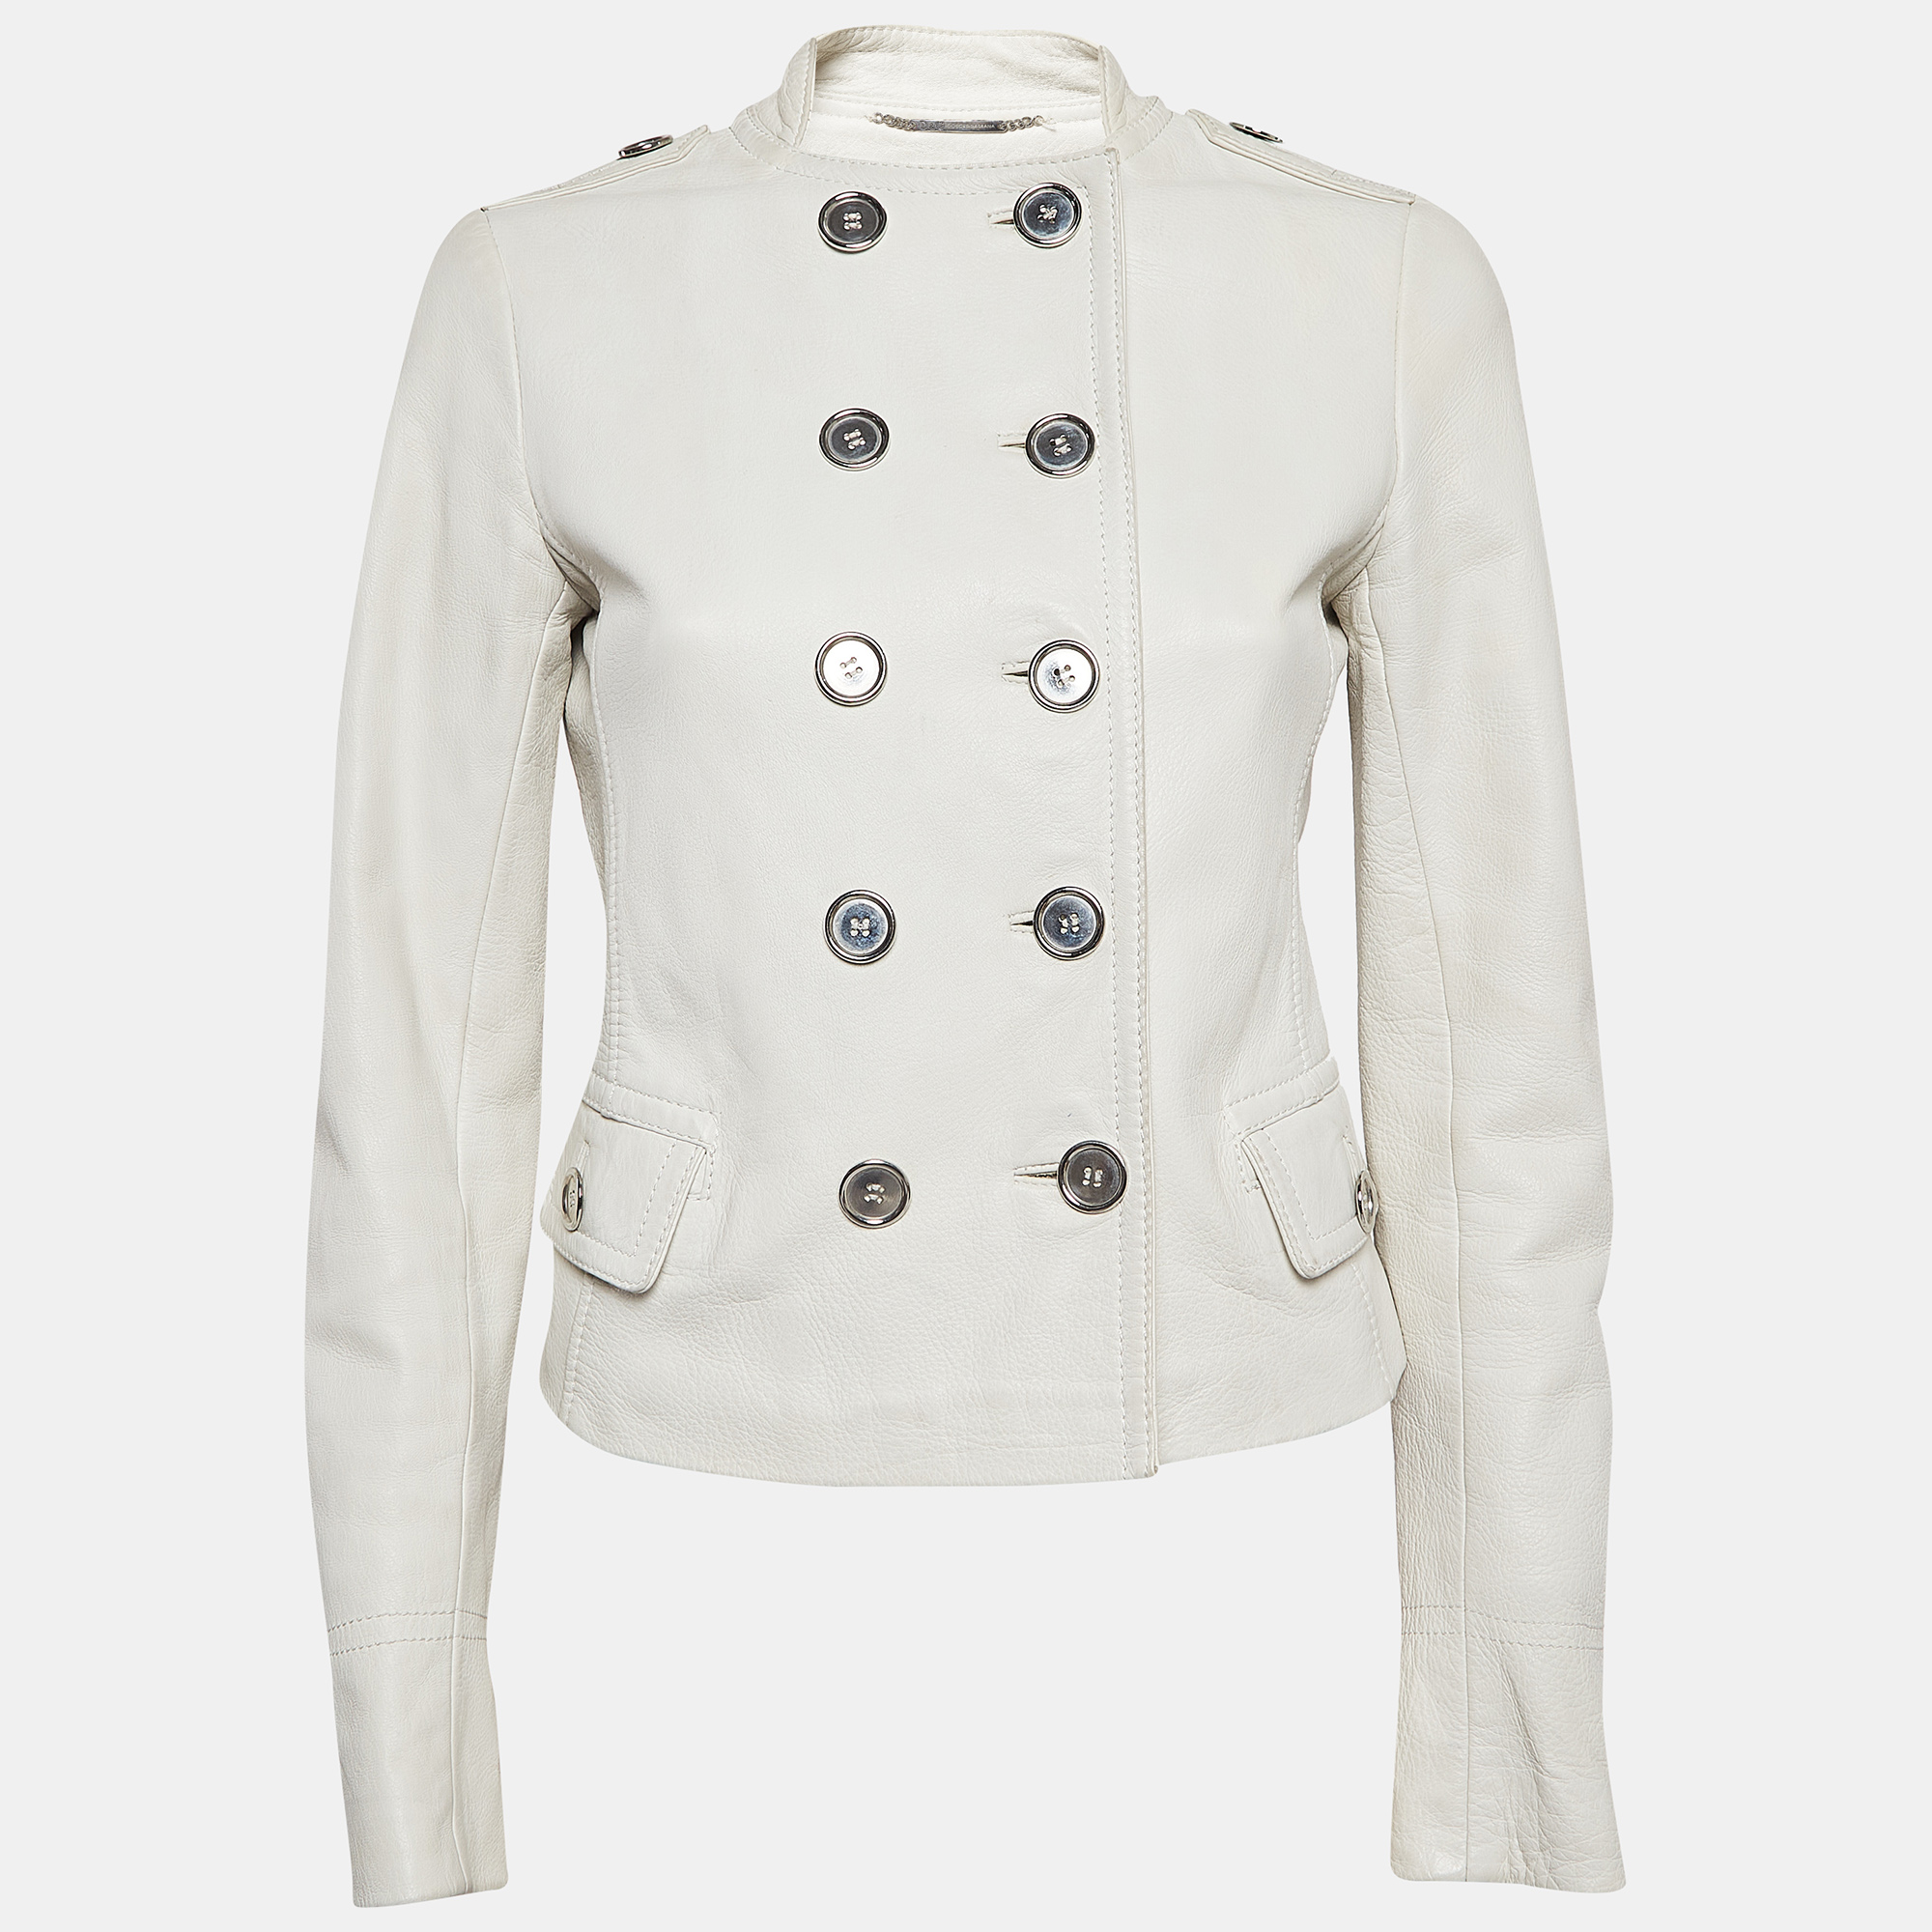 D&g white deer leather double breasted jacket m